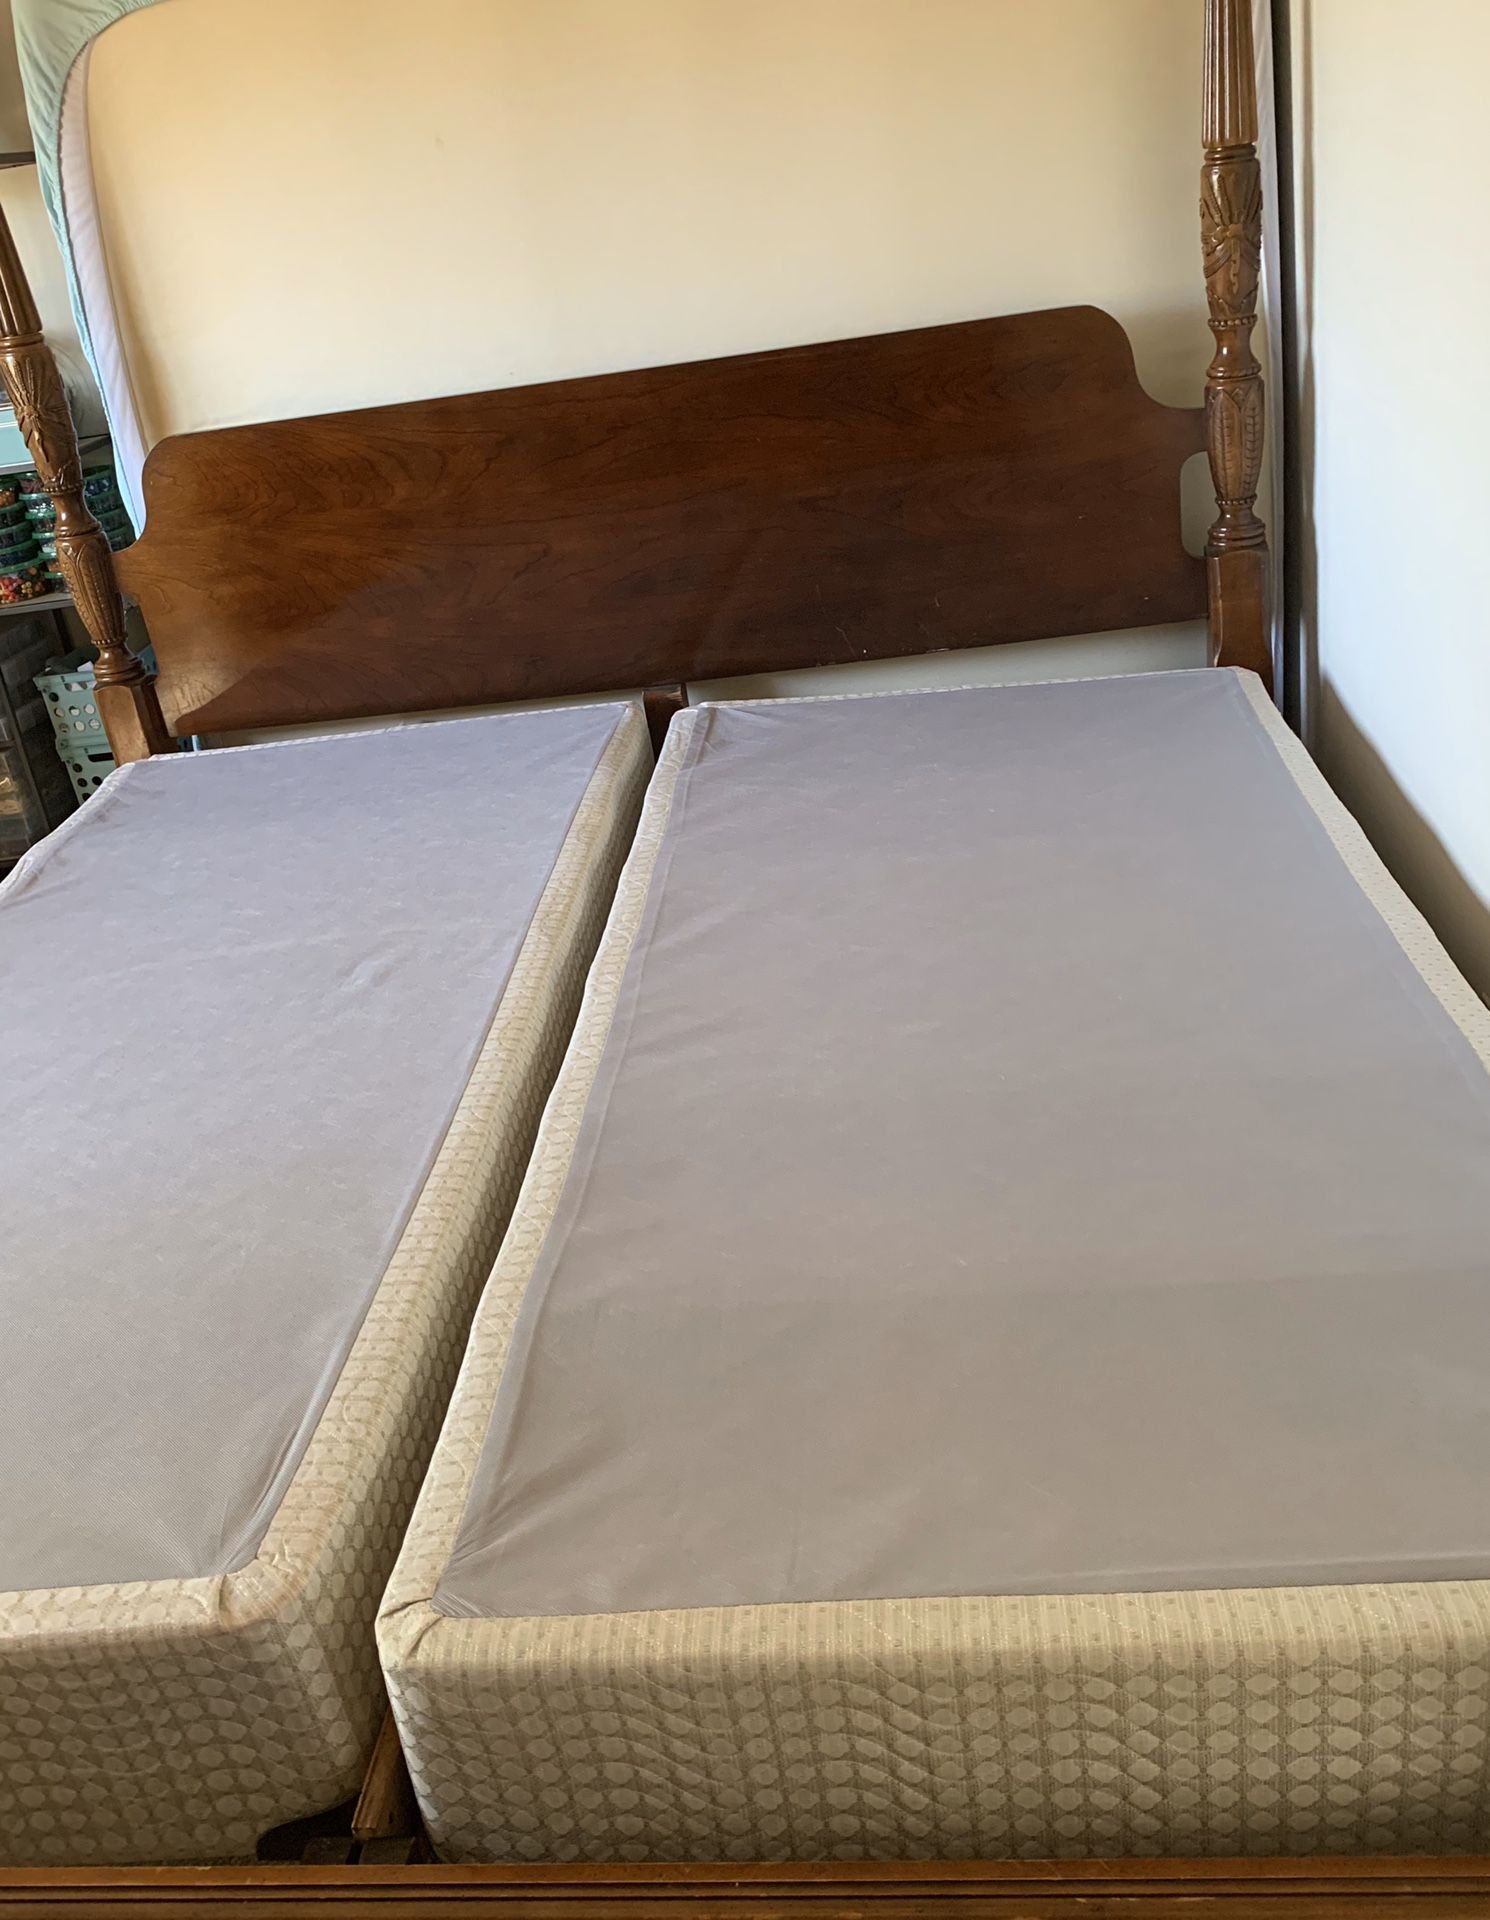 King size bed with mattress cherrywood color with matching dresser and foot stool was use only a few times for guest turning quest room into a office